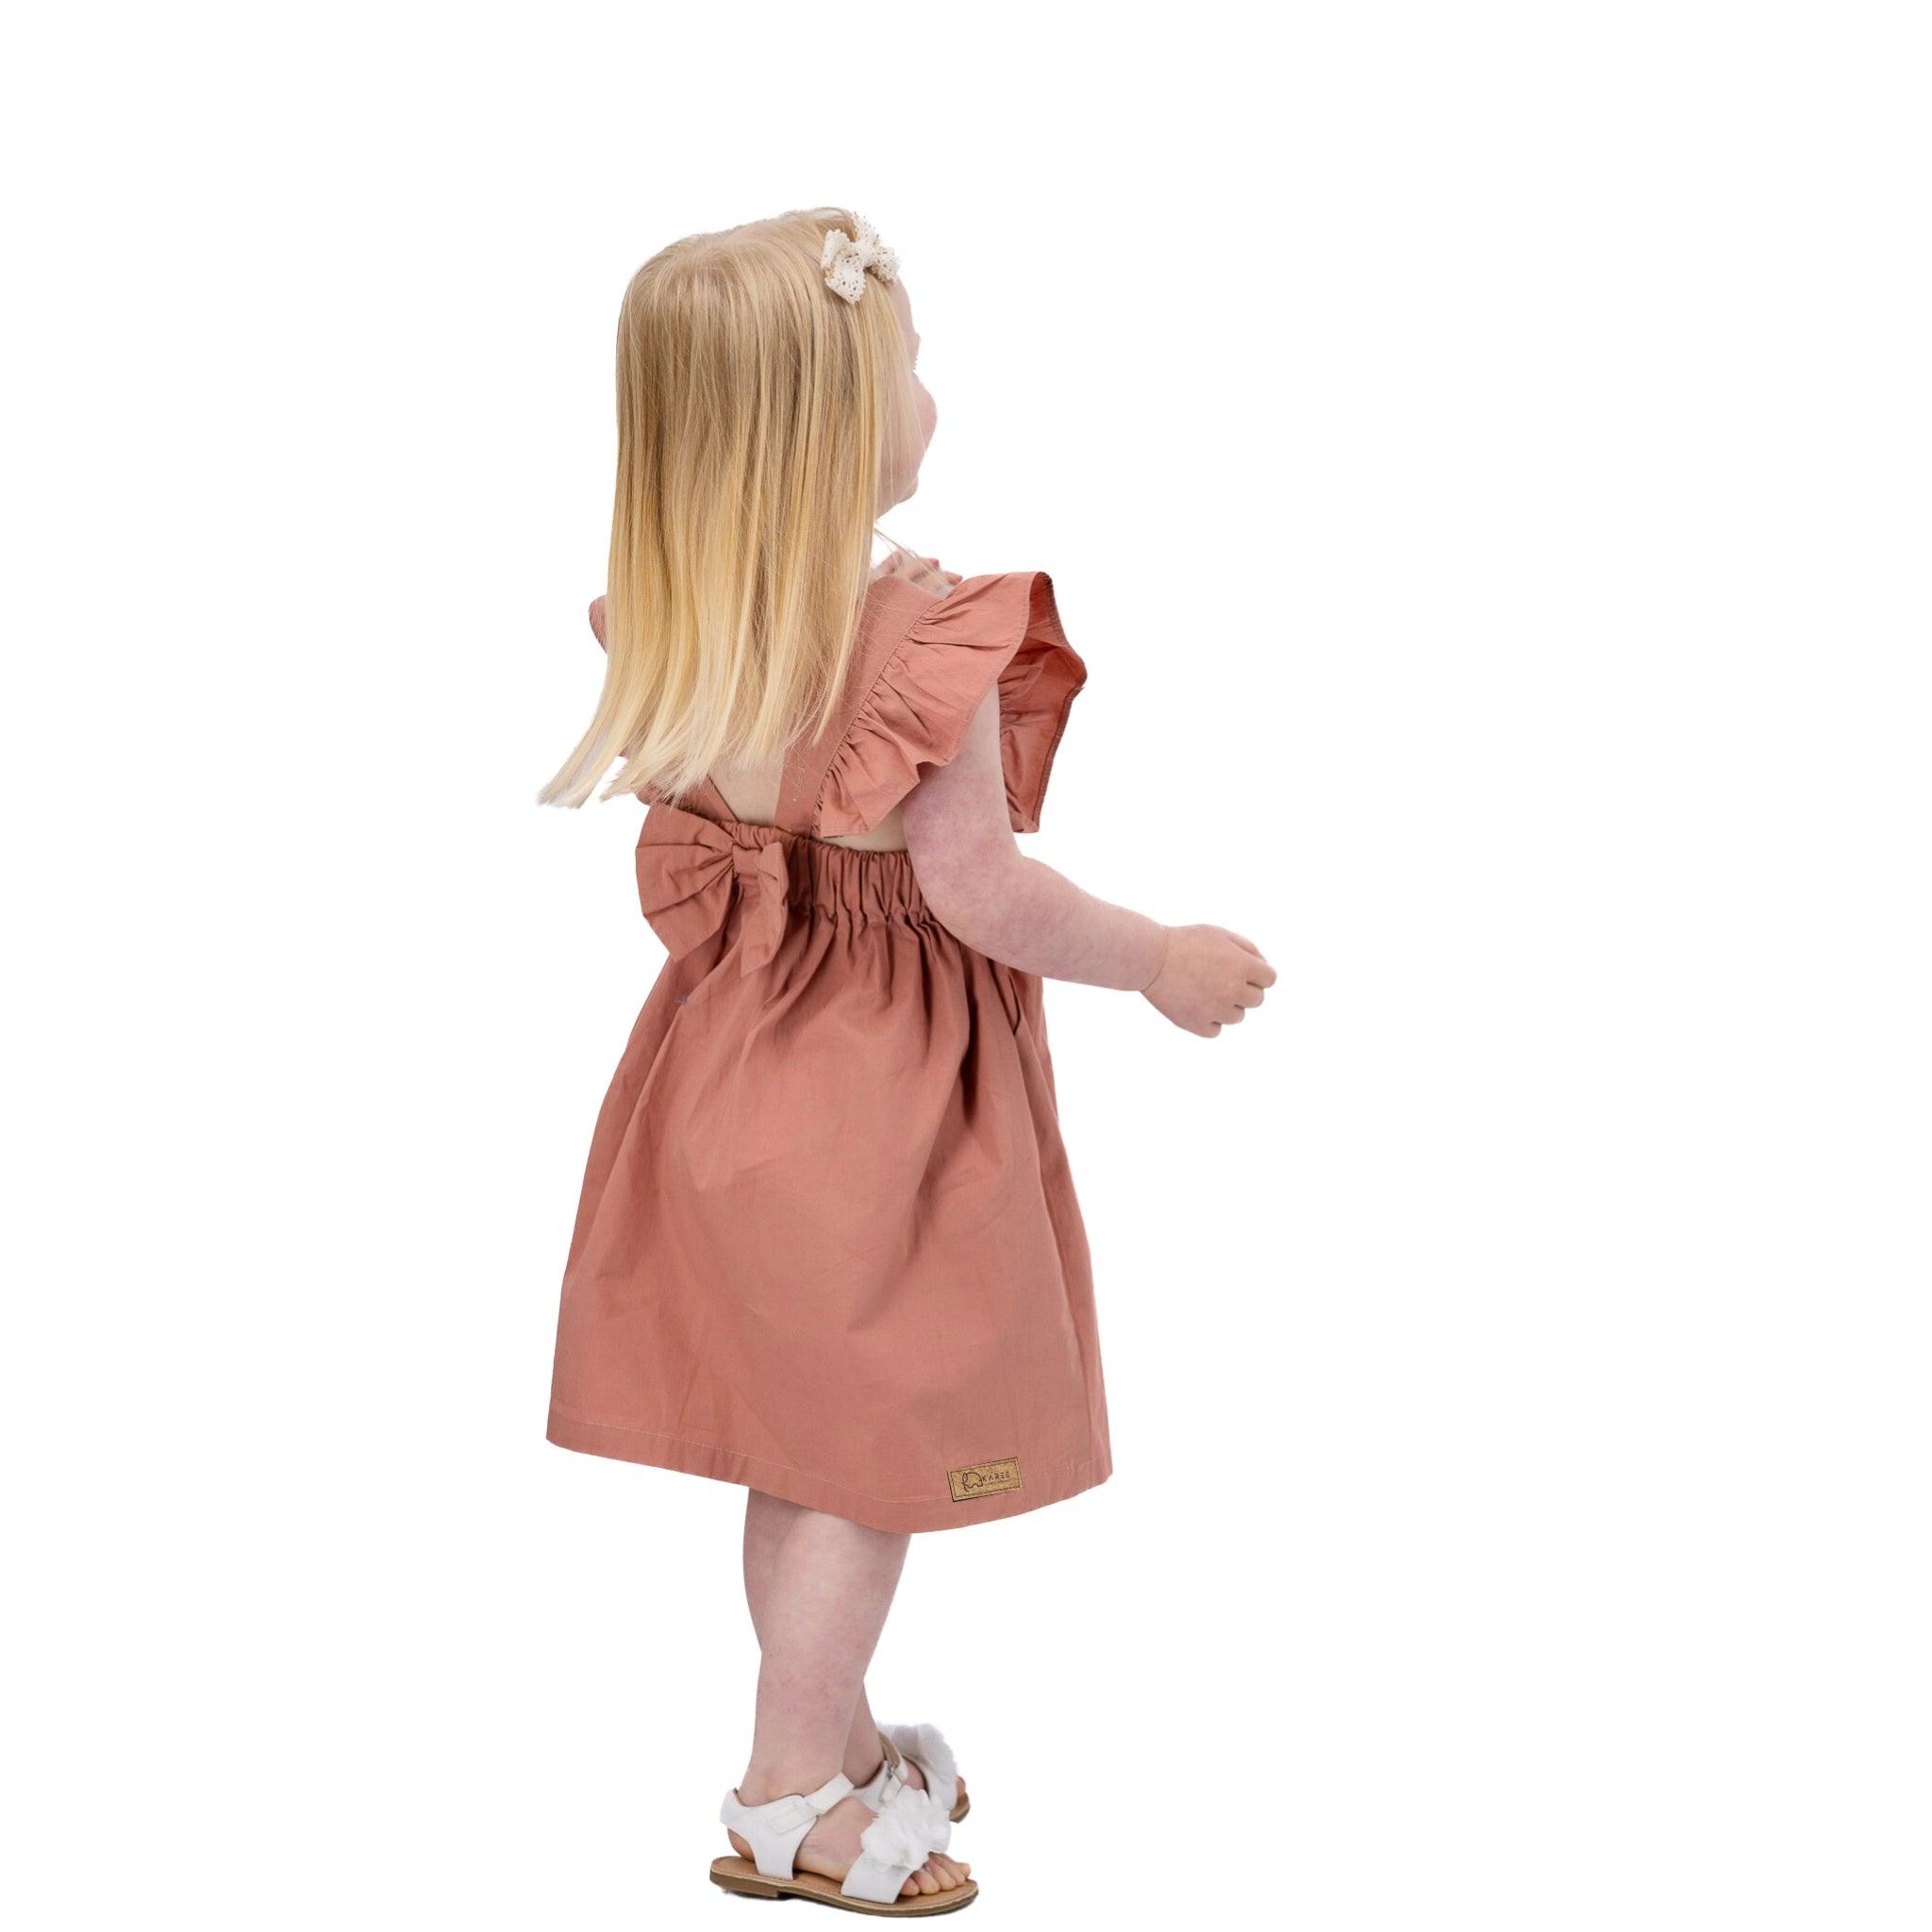 Young girl with long blonde hair wearing a Karee Brick Dust Cotton Floral Dress for Girls and white sandals, standing and looking to the side, isolated on a white background.